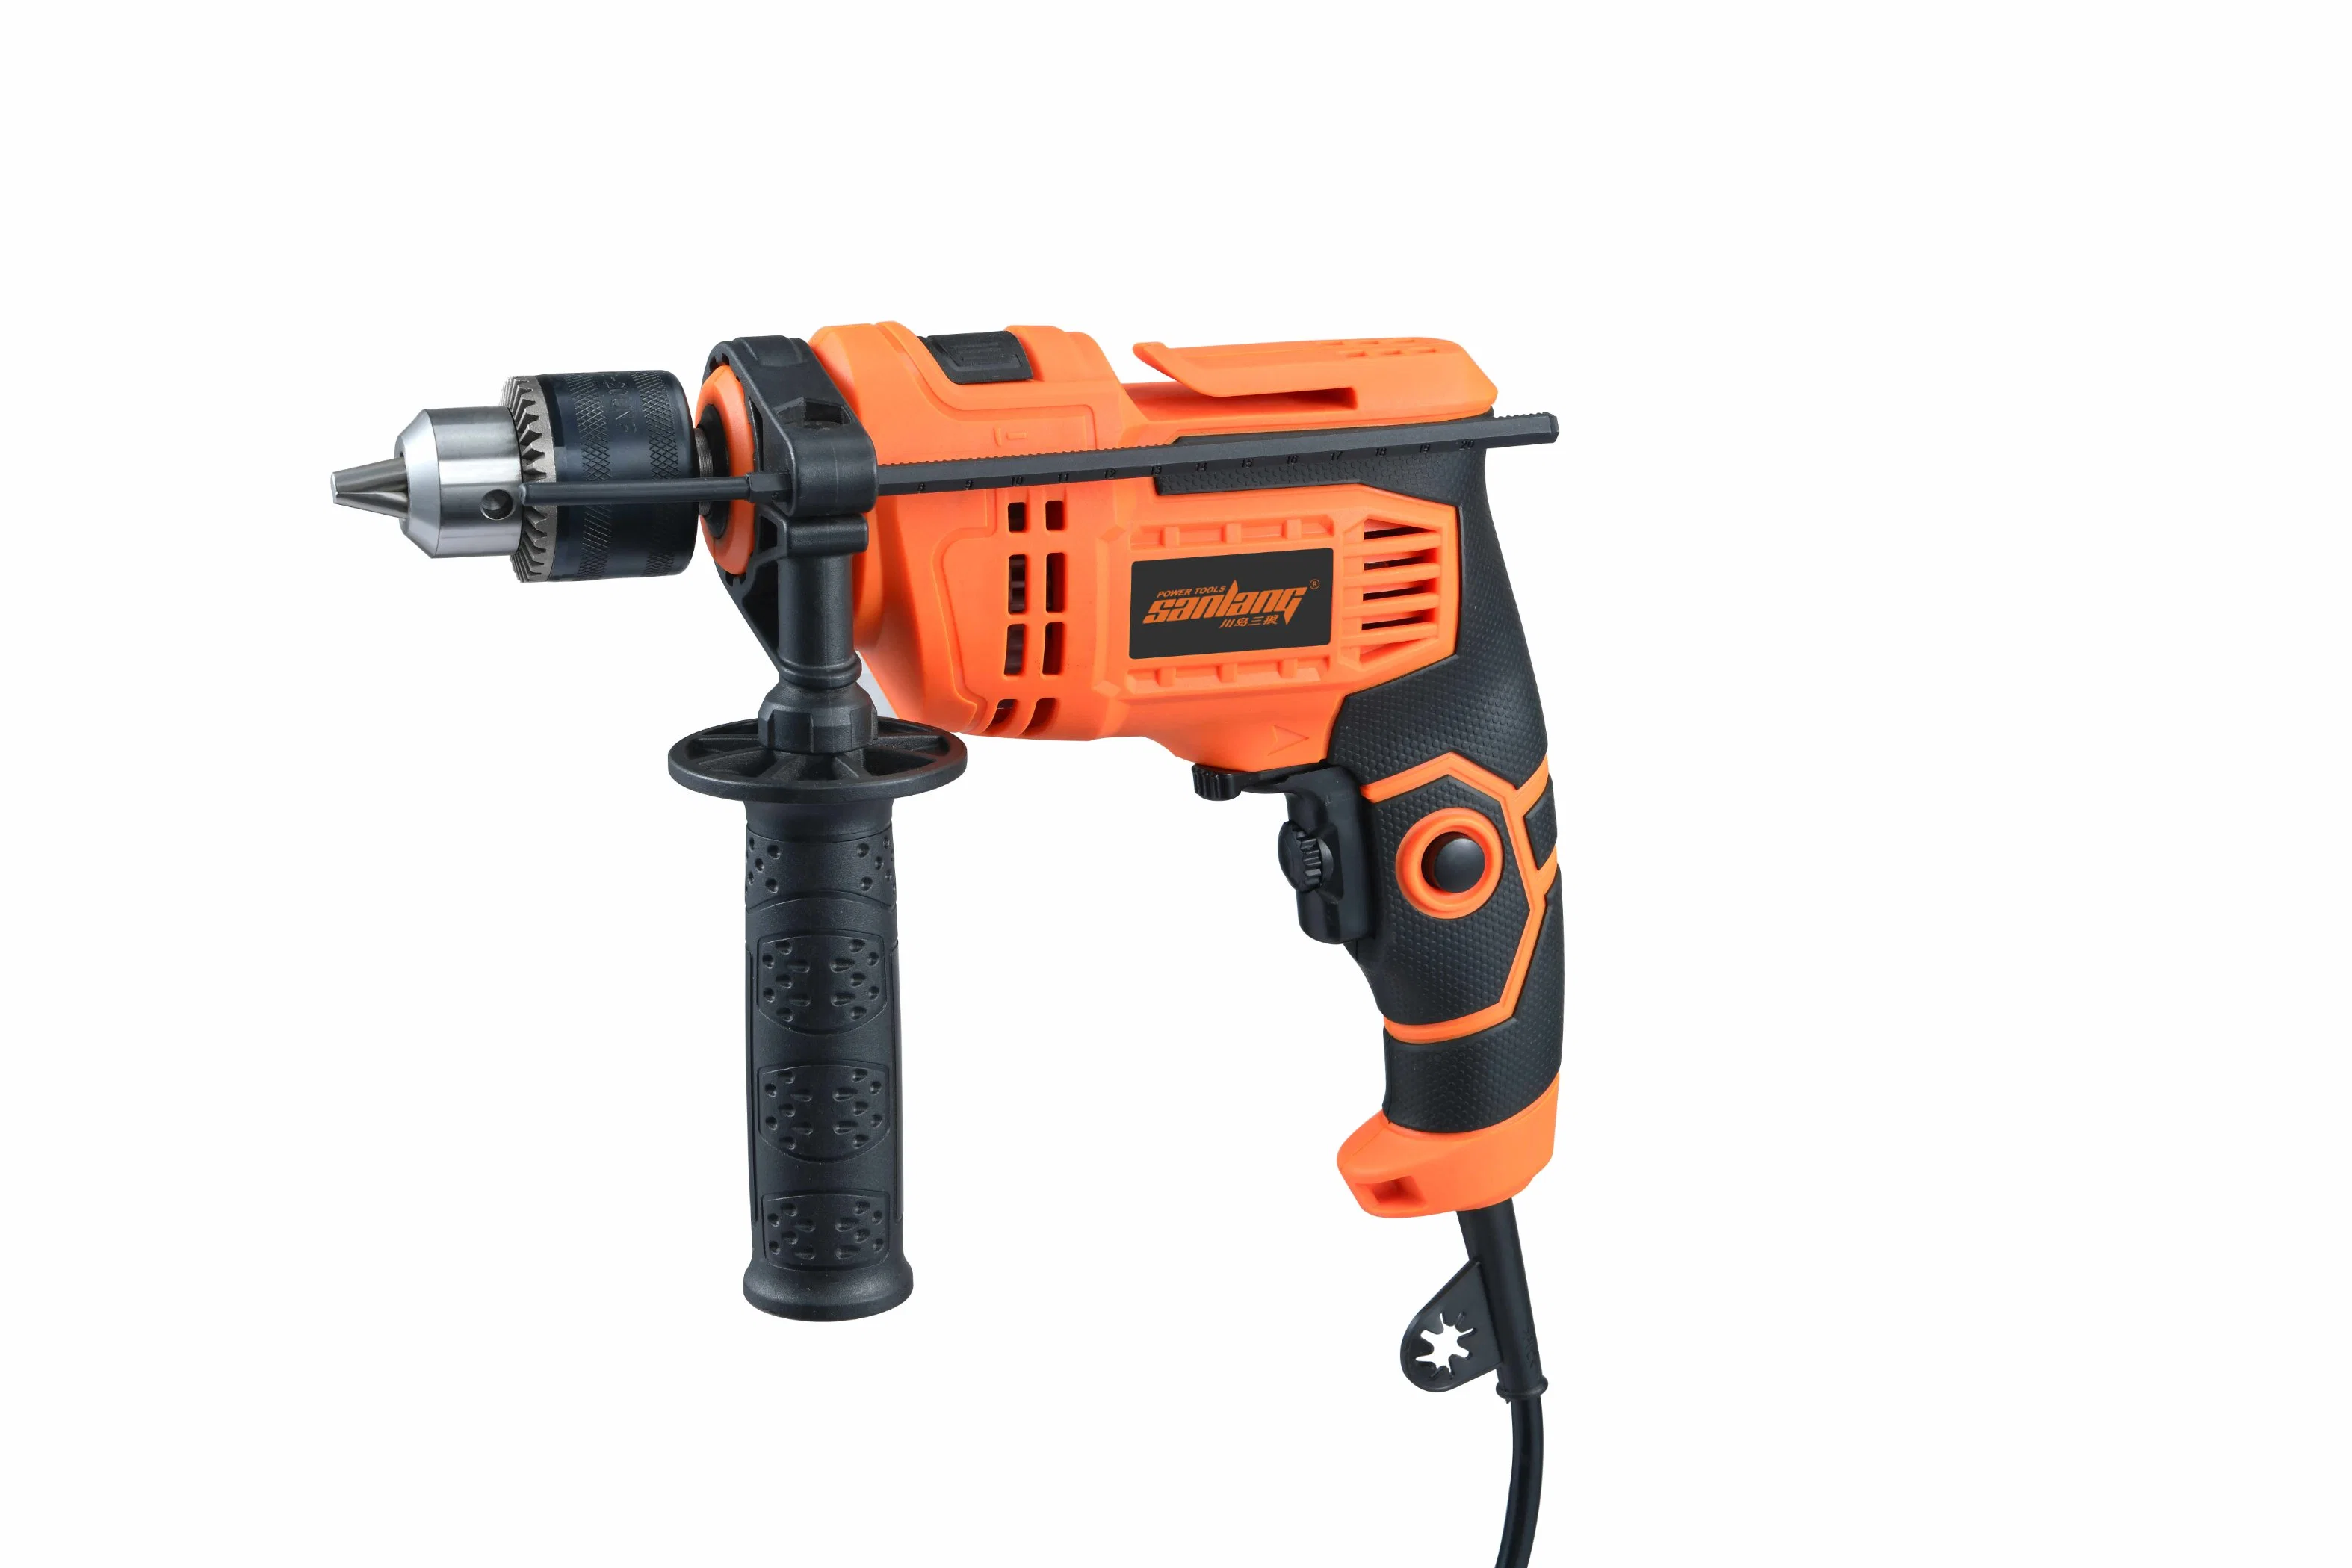 Sanlang 720W SL09-13b Electric Impact Drill Electric Hammer Drill